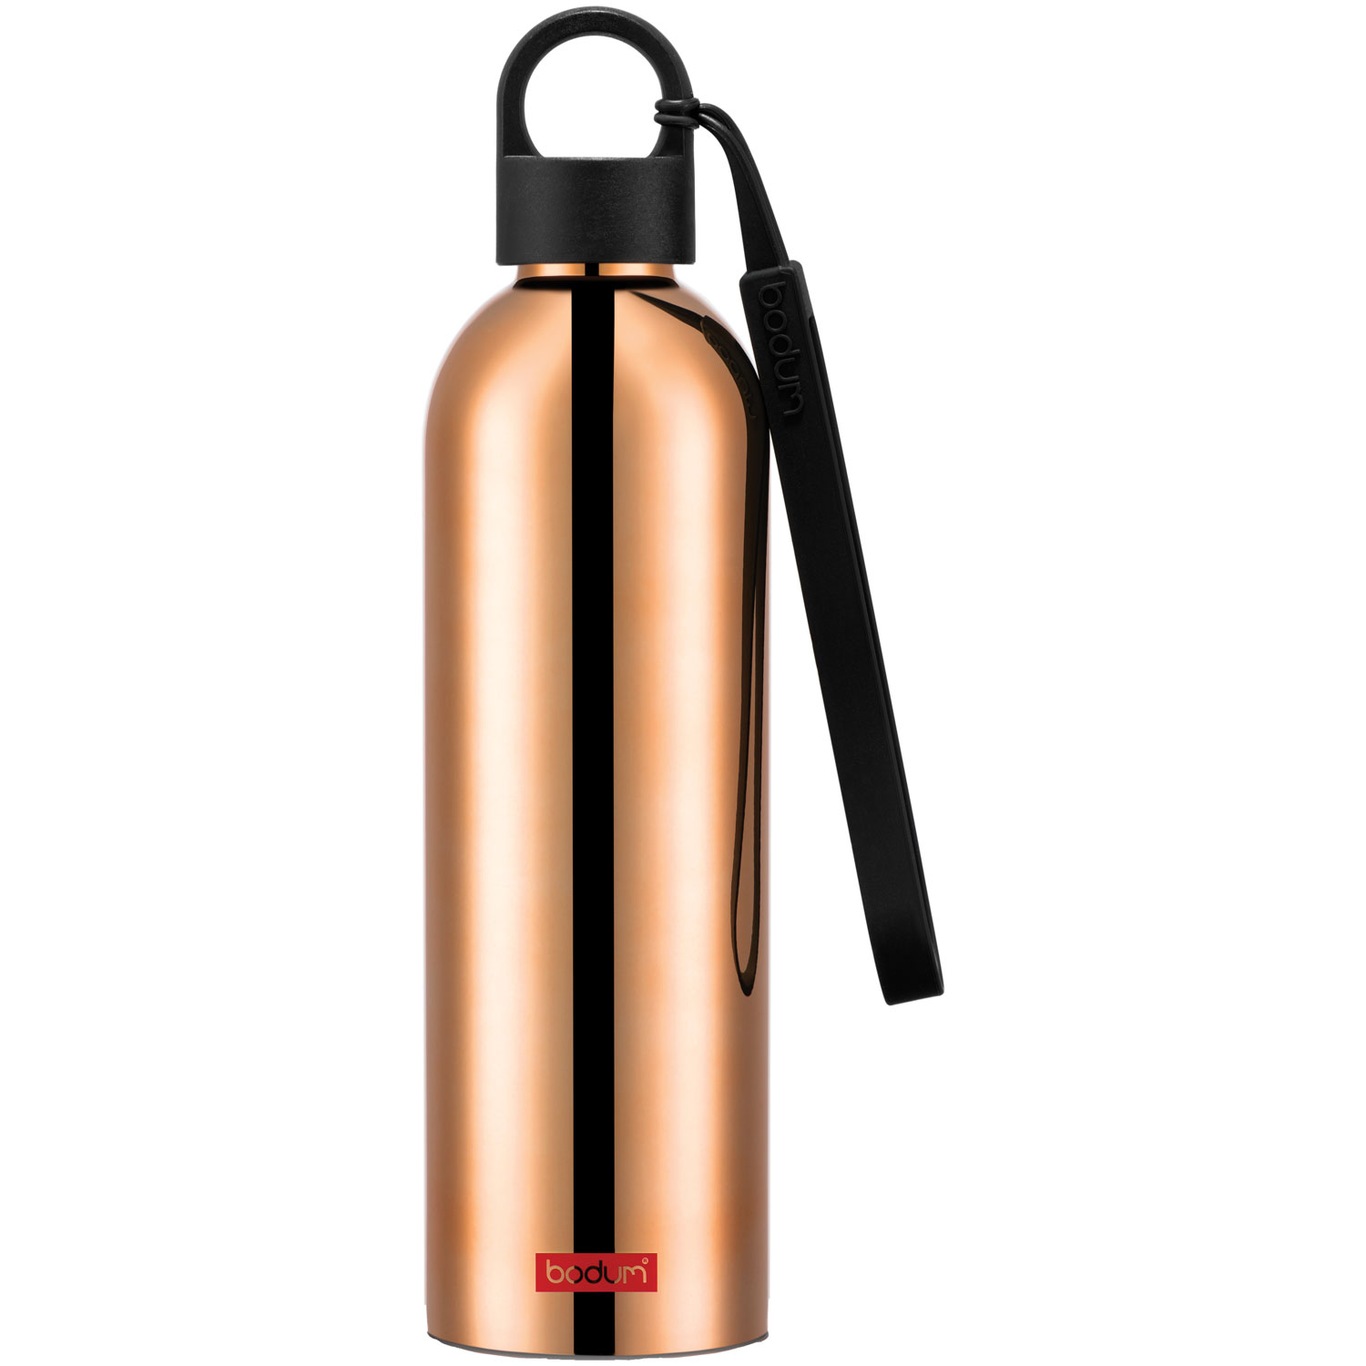 Melior Double Walled Vacuum Flask 50 cl, Copper